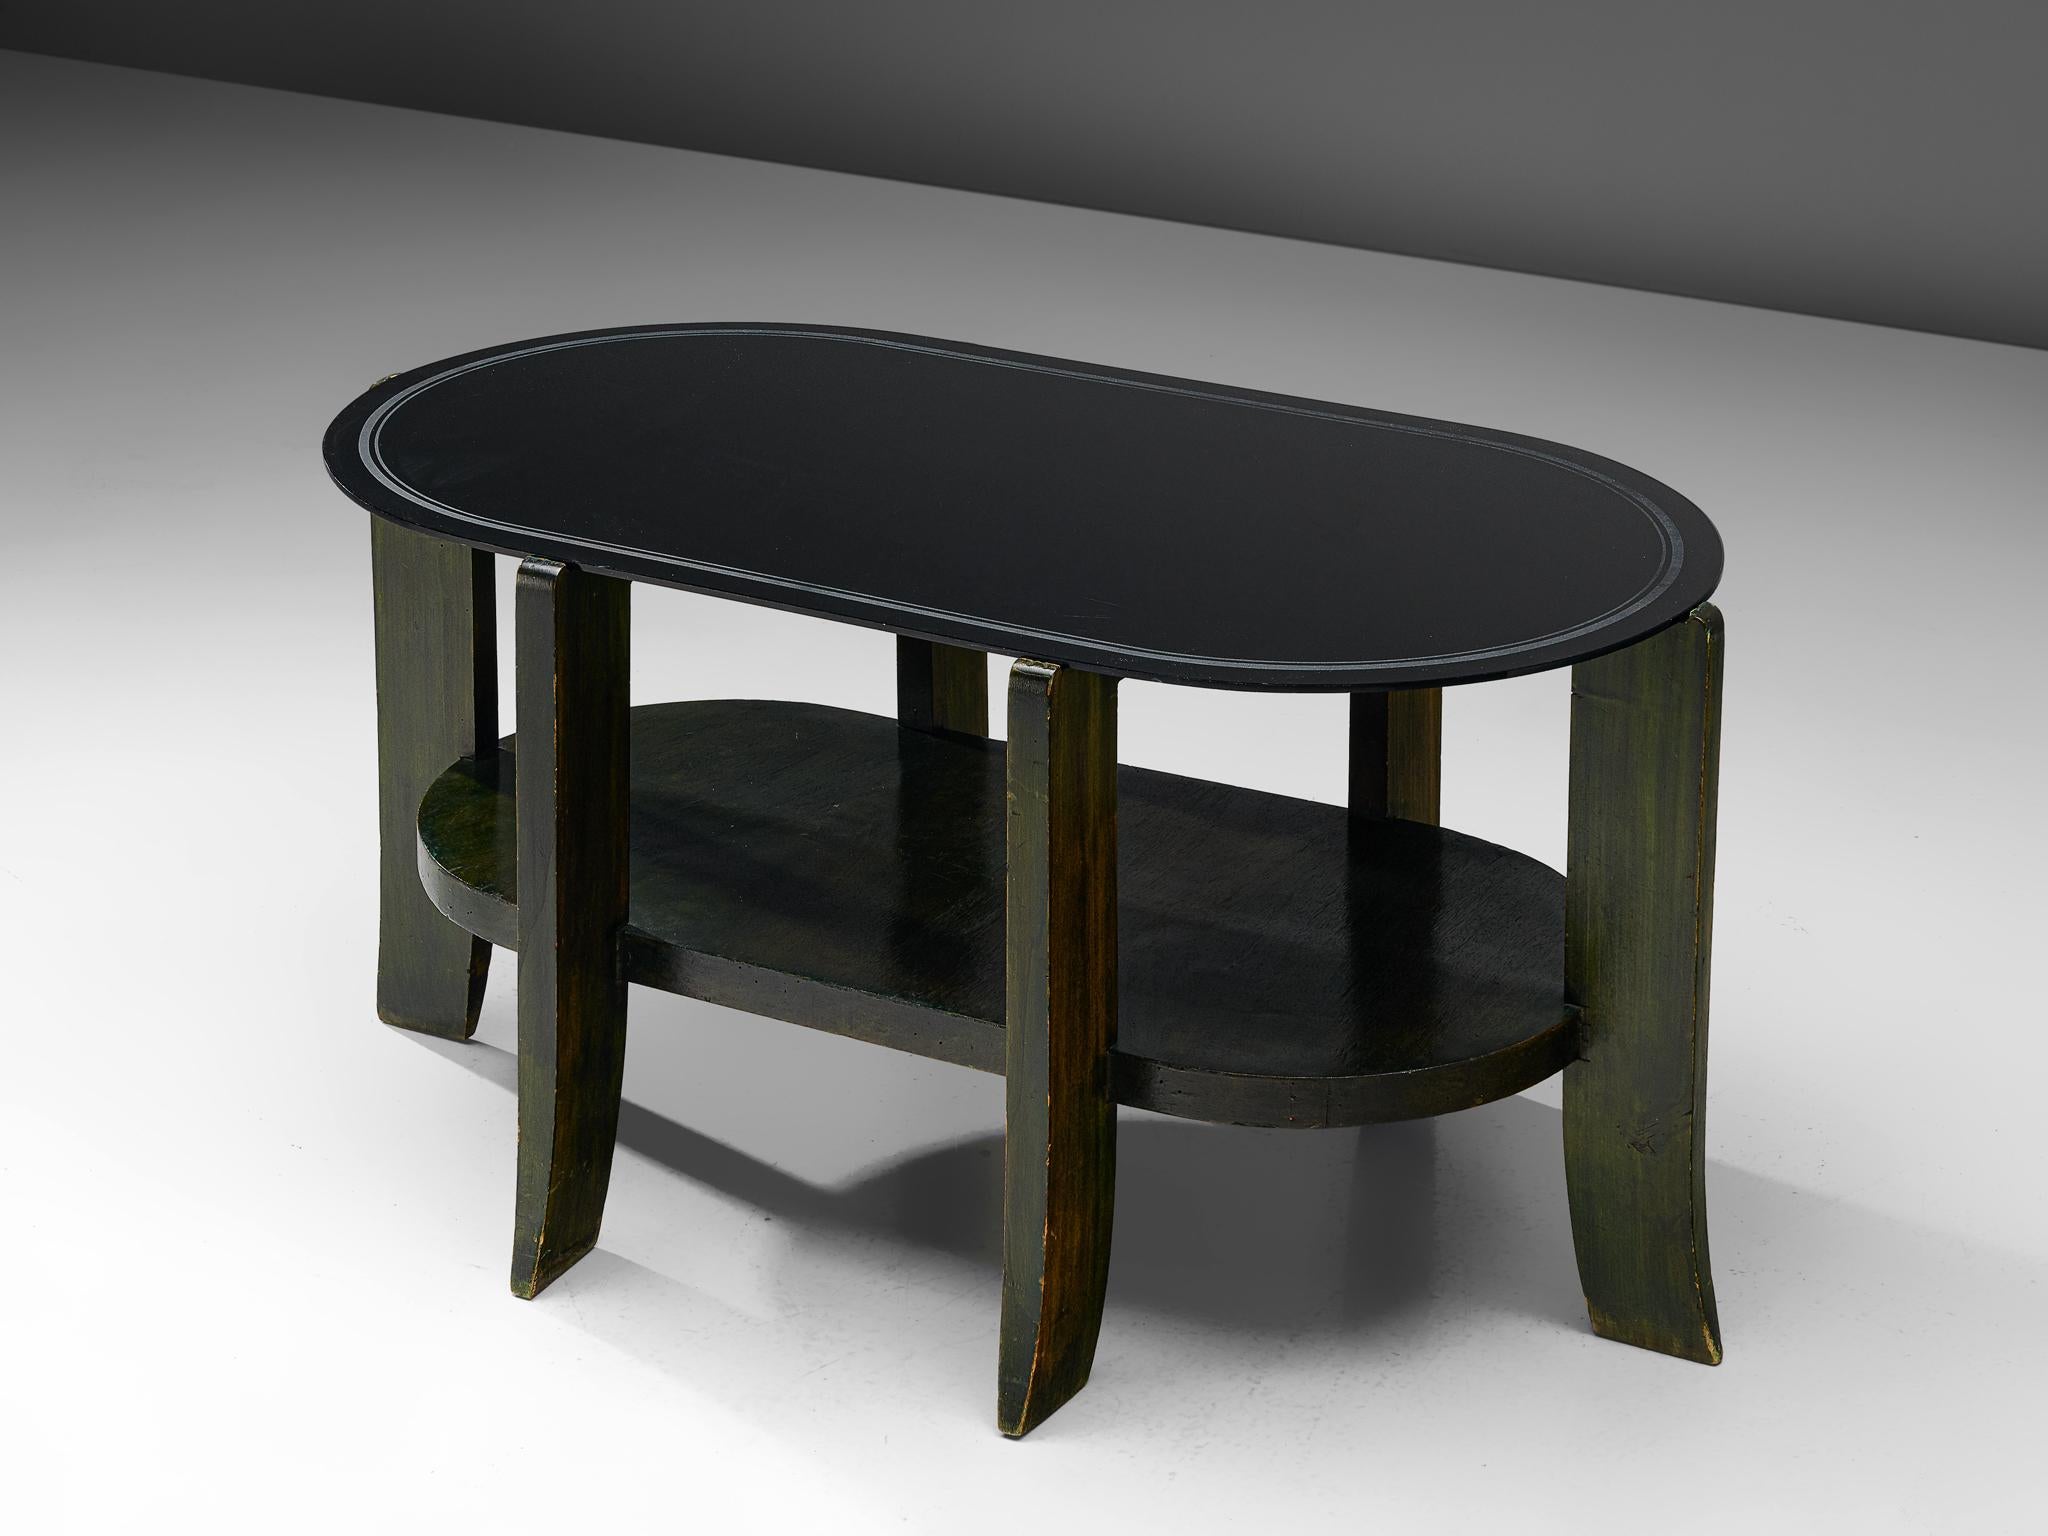 Coffee table, wood and glass, Italy, 1950s

An oval shaped coffee table with a black glass top. The glass rests on six robust legs that form the base. The legs are sturdy and turn slighlt outwards near the bottom. The wooden base is dark green